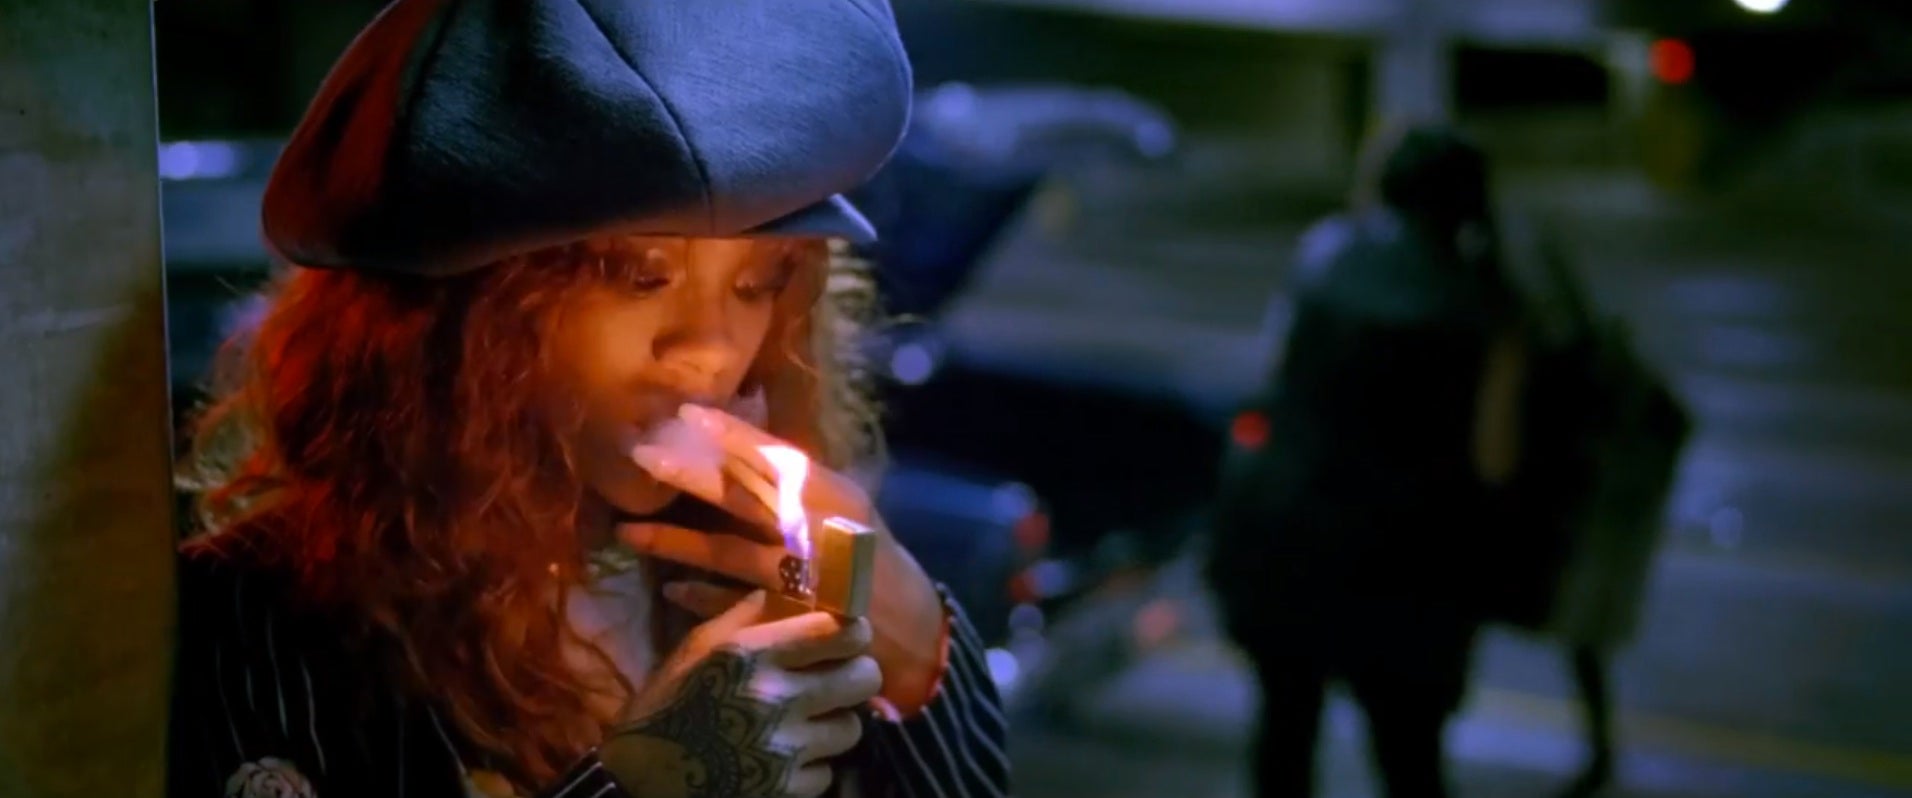 7 Reasons Why We're Ready for Rihanna's 'BBHMM" Video
